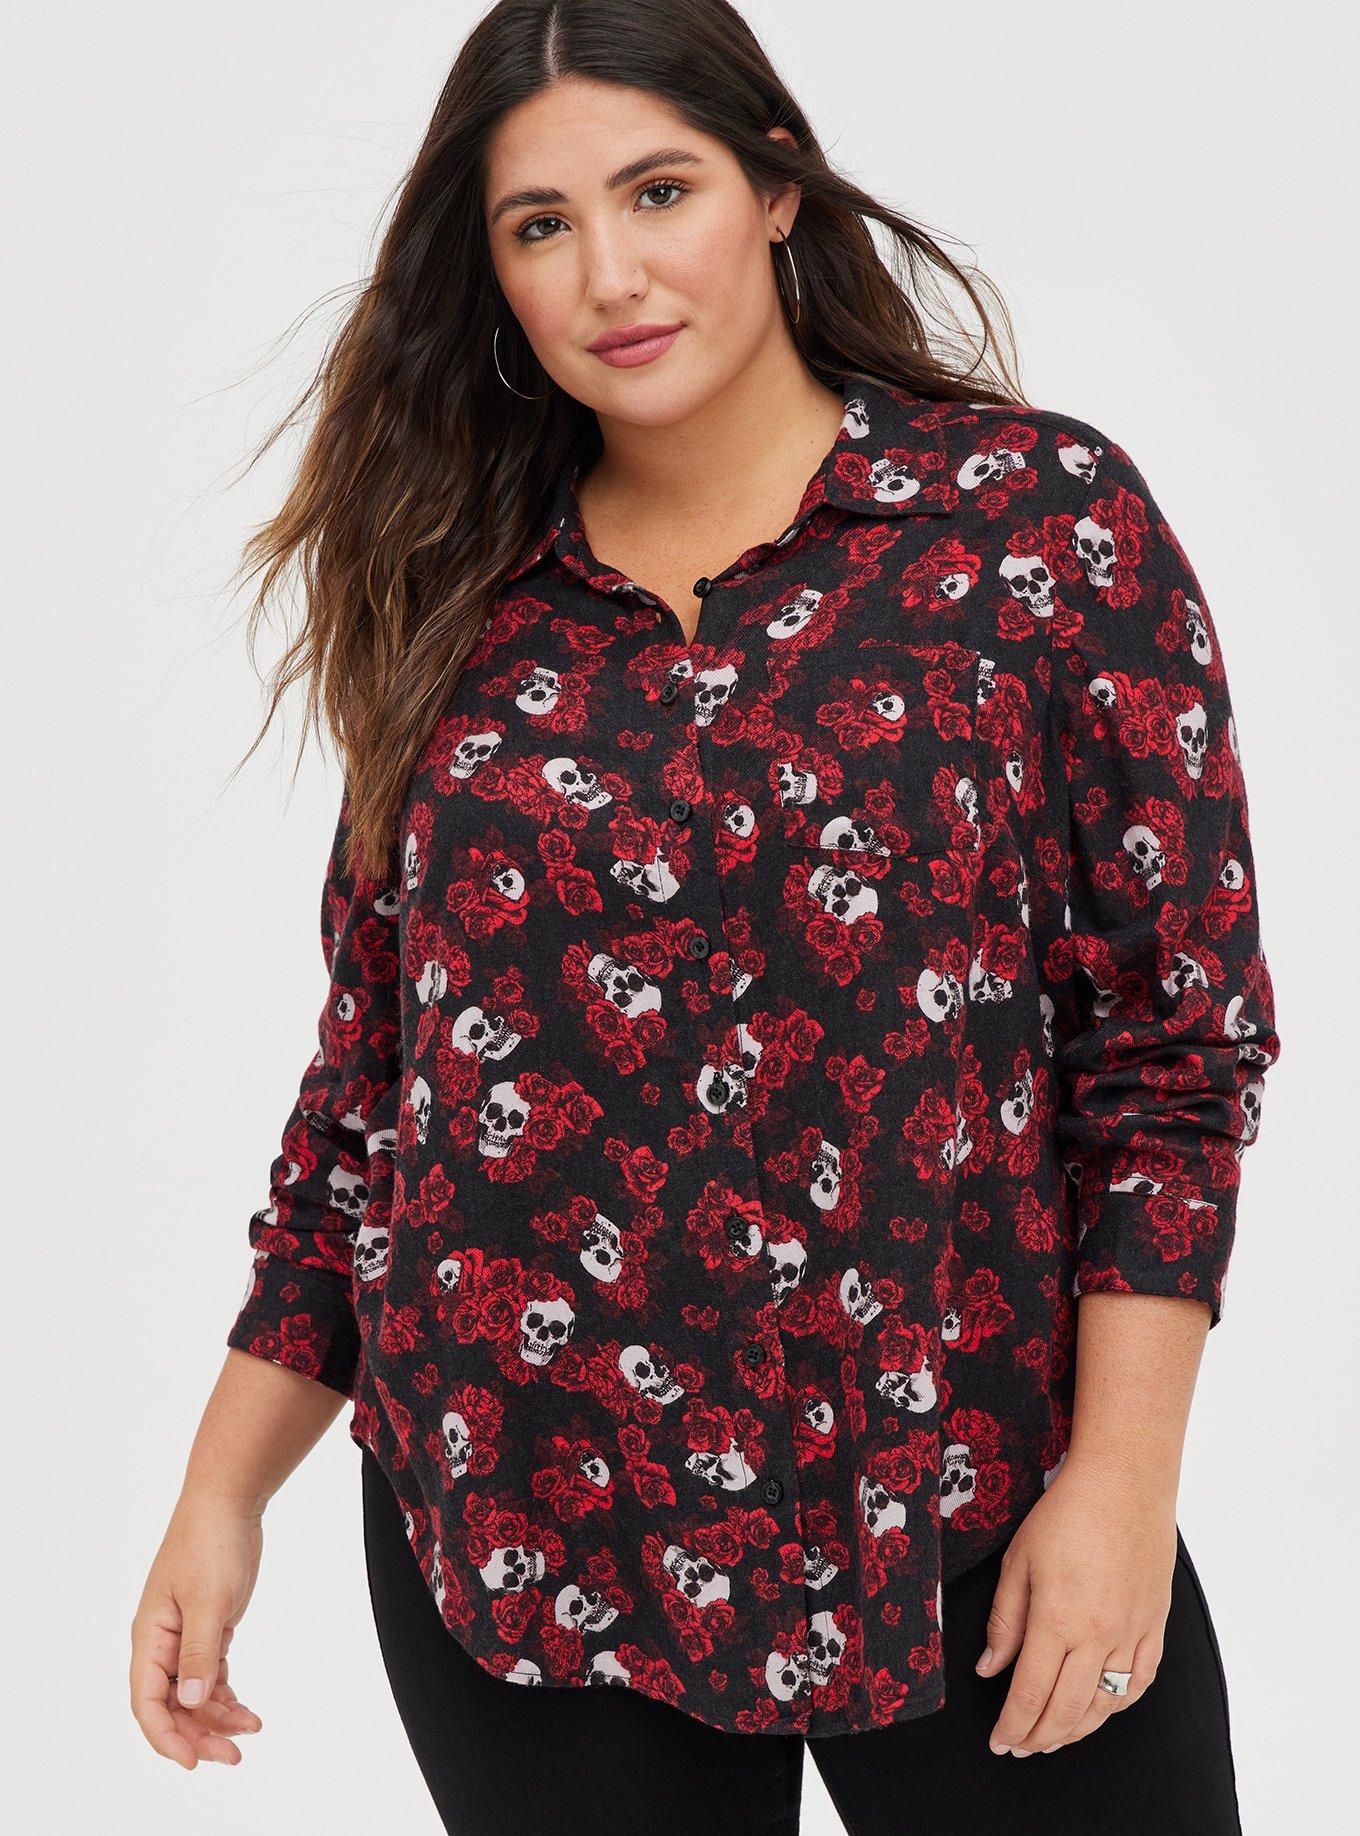 Torrid Women's Gray Floral Plus Size Relaxed Fit Brushed Rayon Top